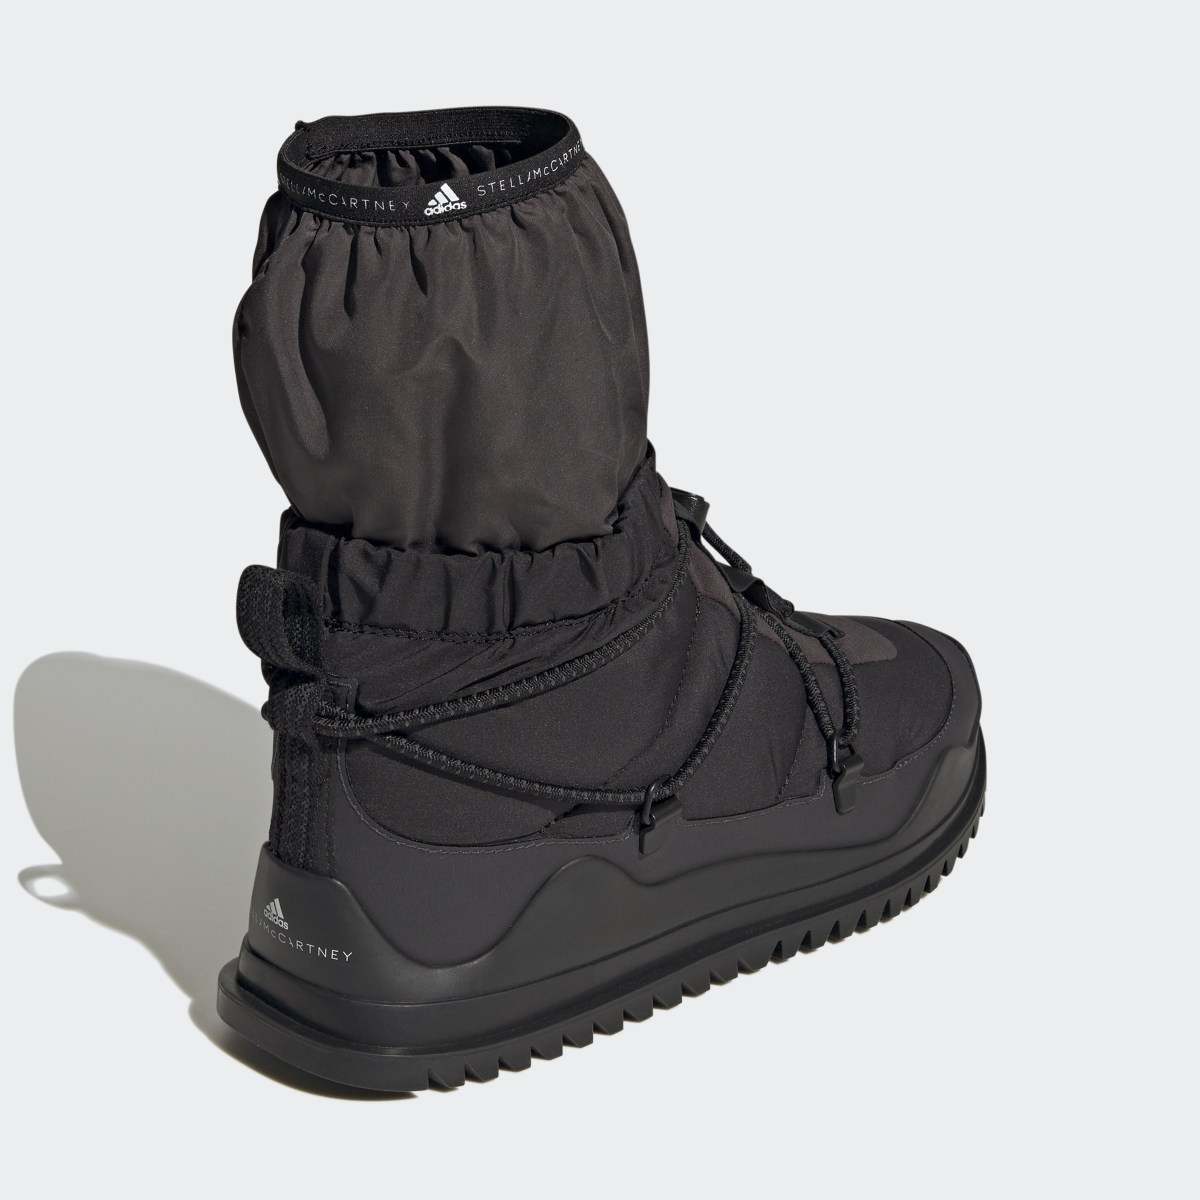 Adidas by Stella McCartney COLD.RDY Winter Boots. 6